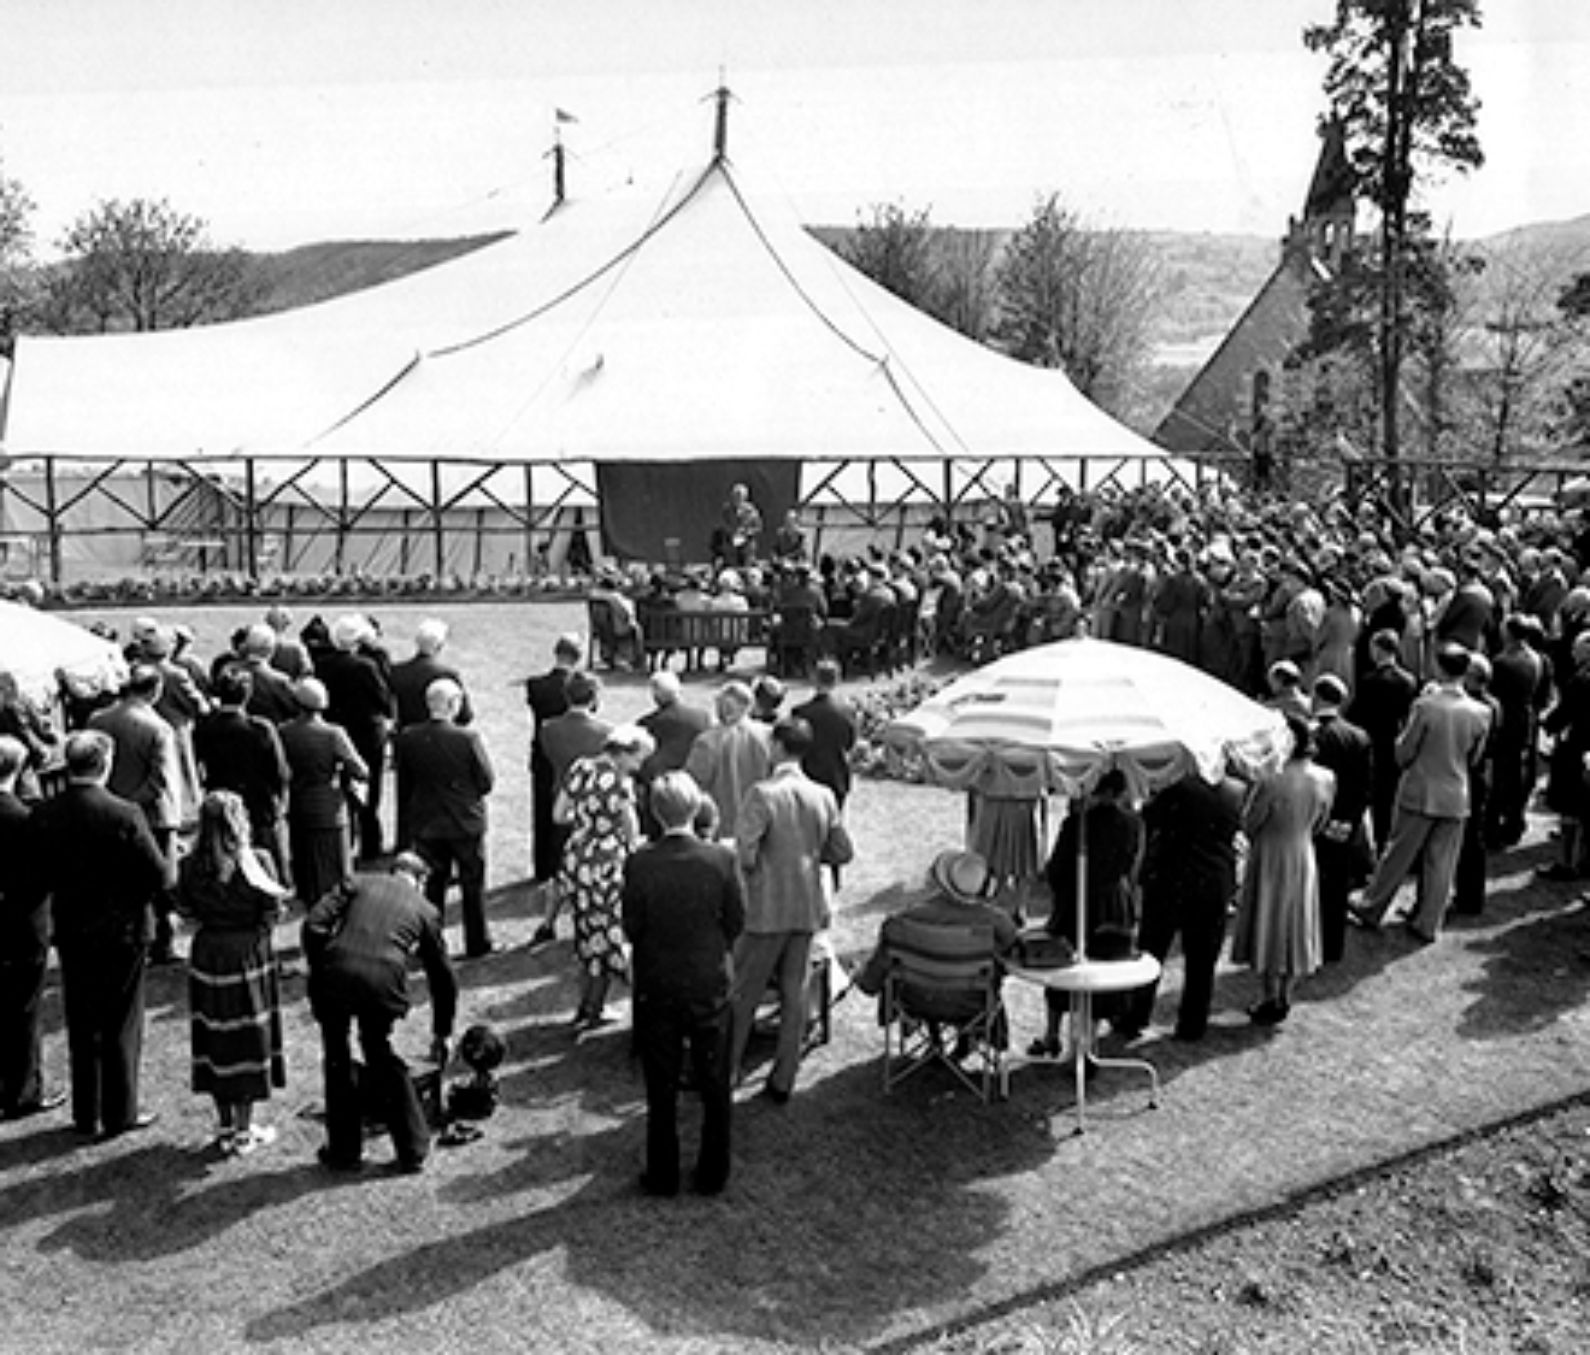 A black and white image from the opening of the theatre in 1951, a large group of people crowd around a tent in a field